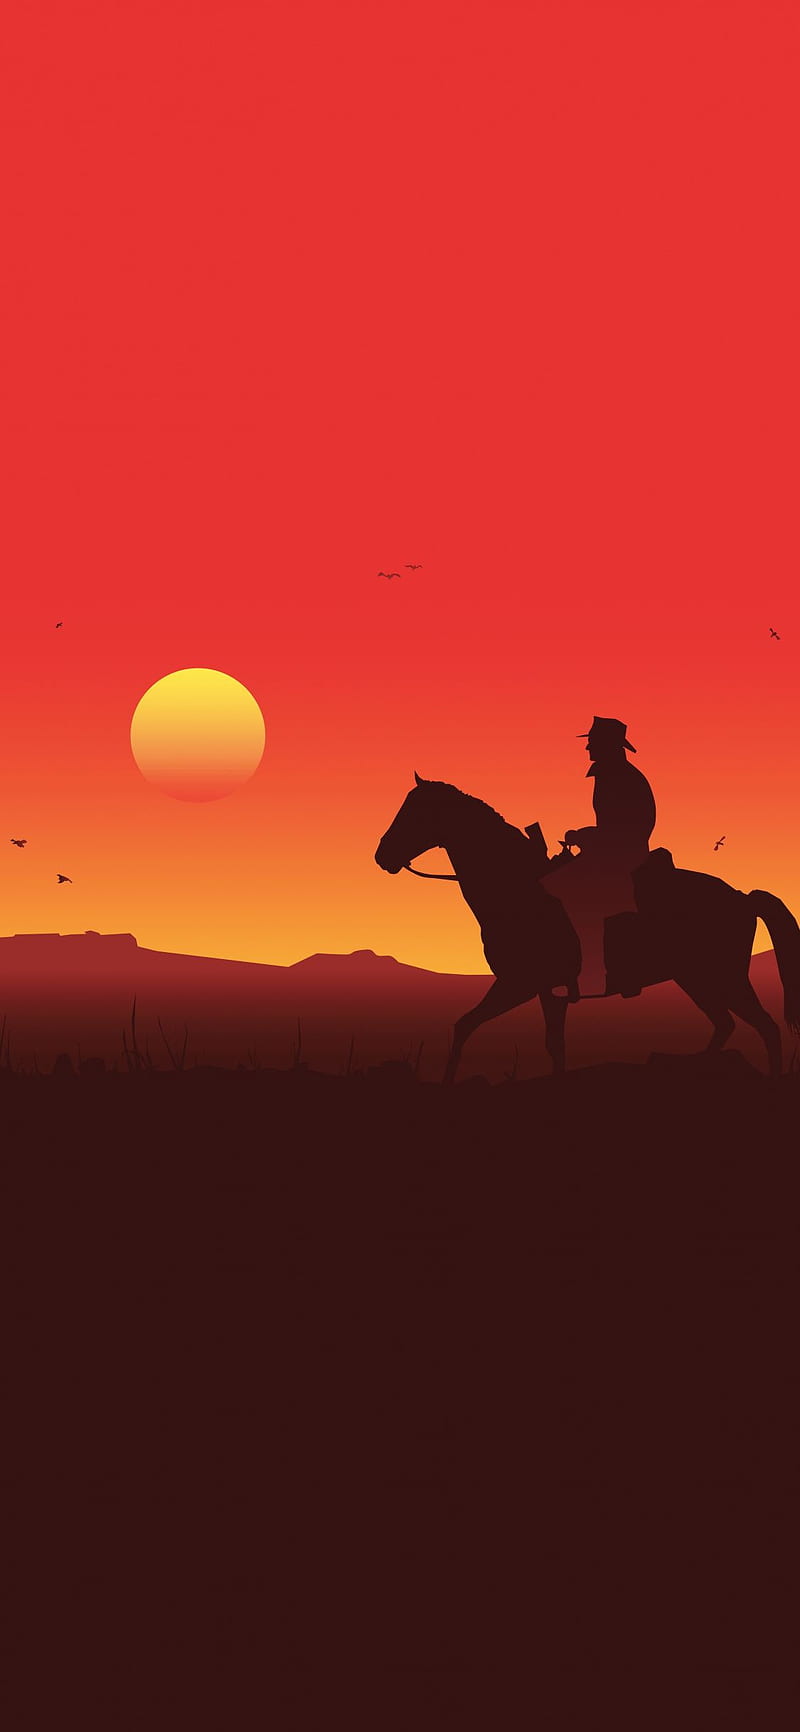 Youre My brother  Phone wallpaper version as requested    rreddeadredemption